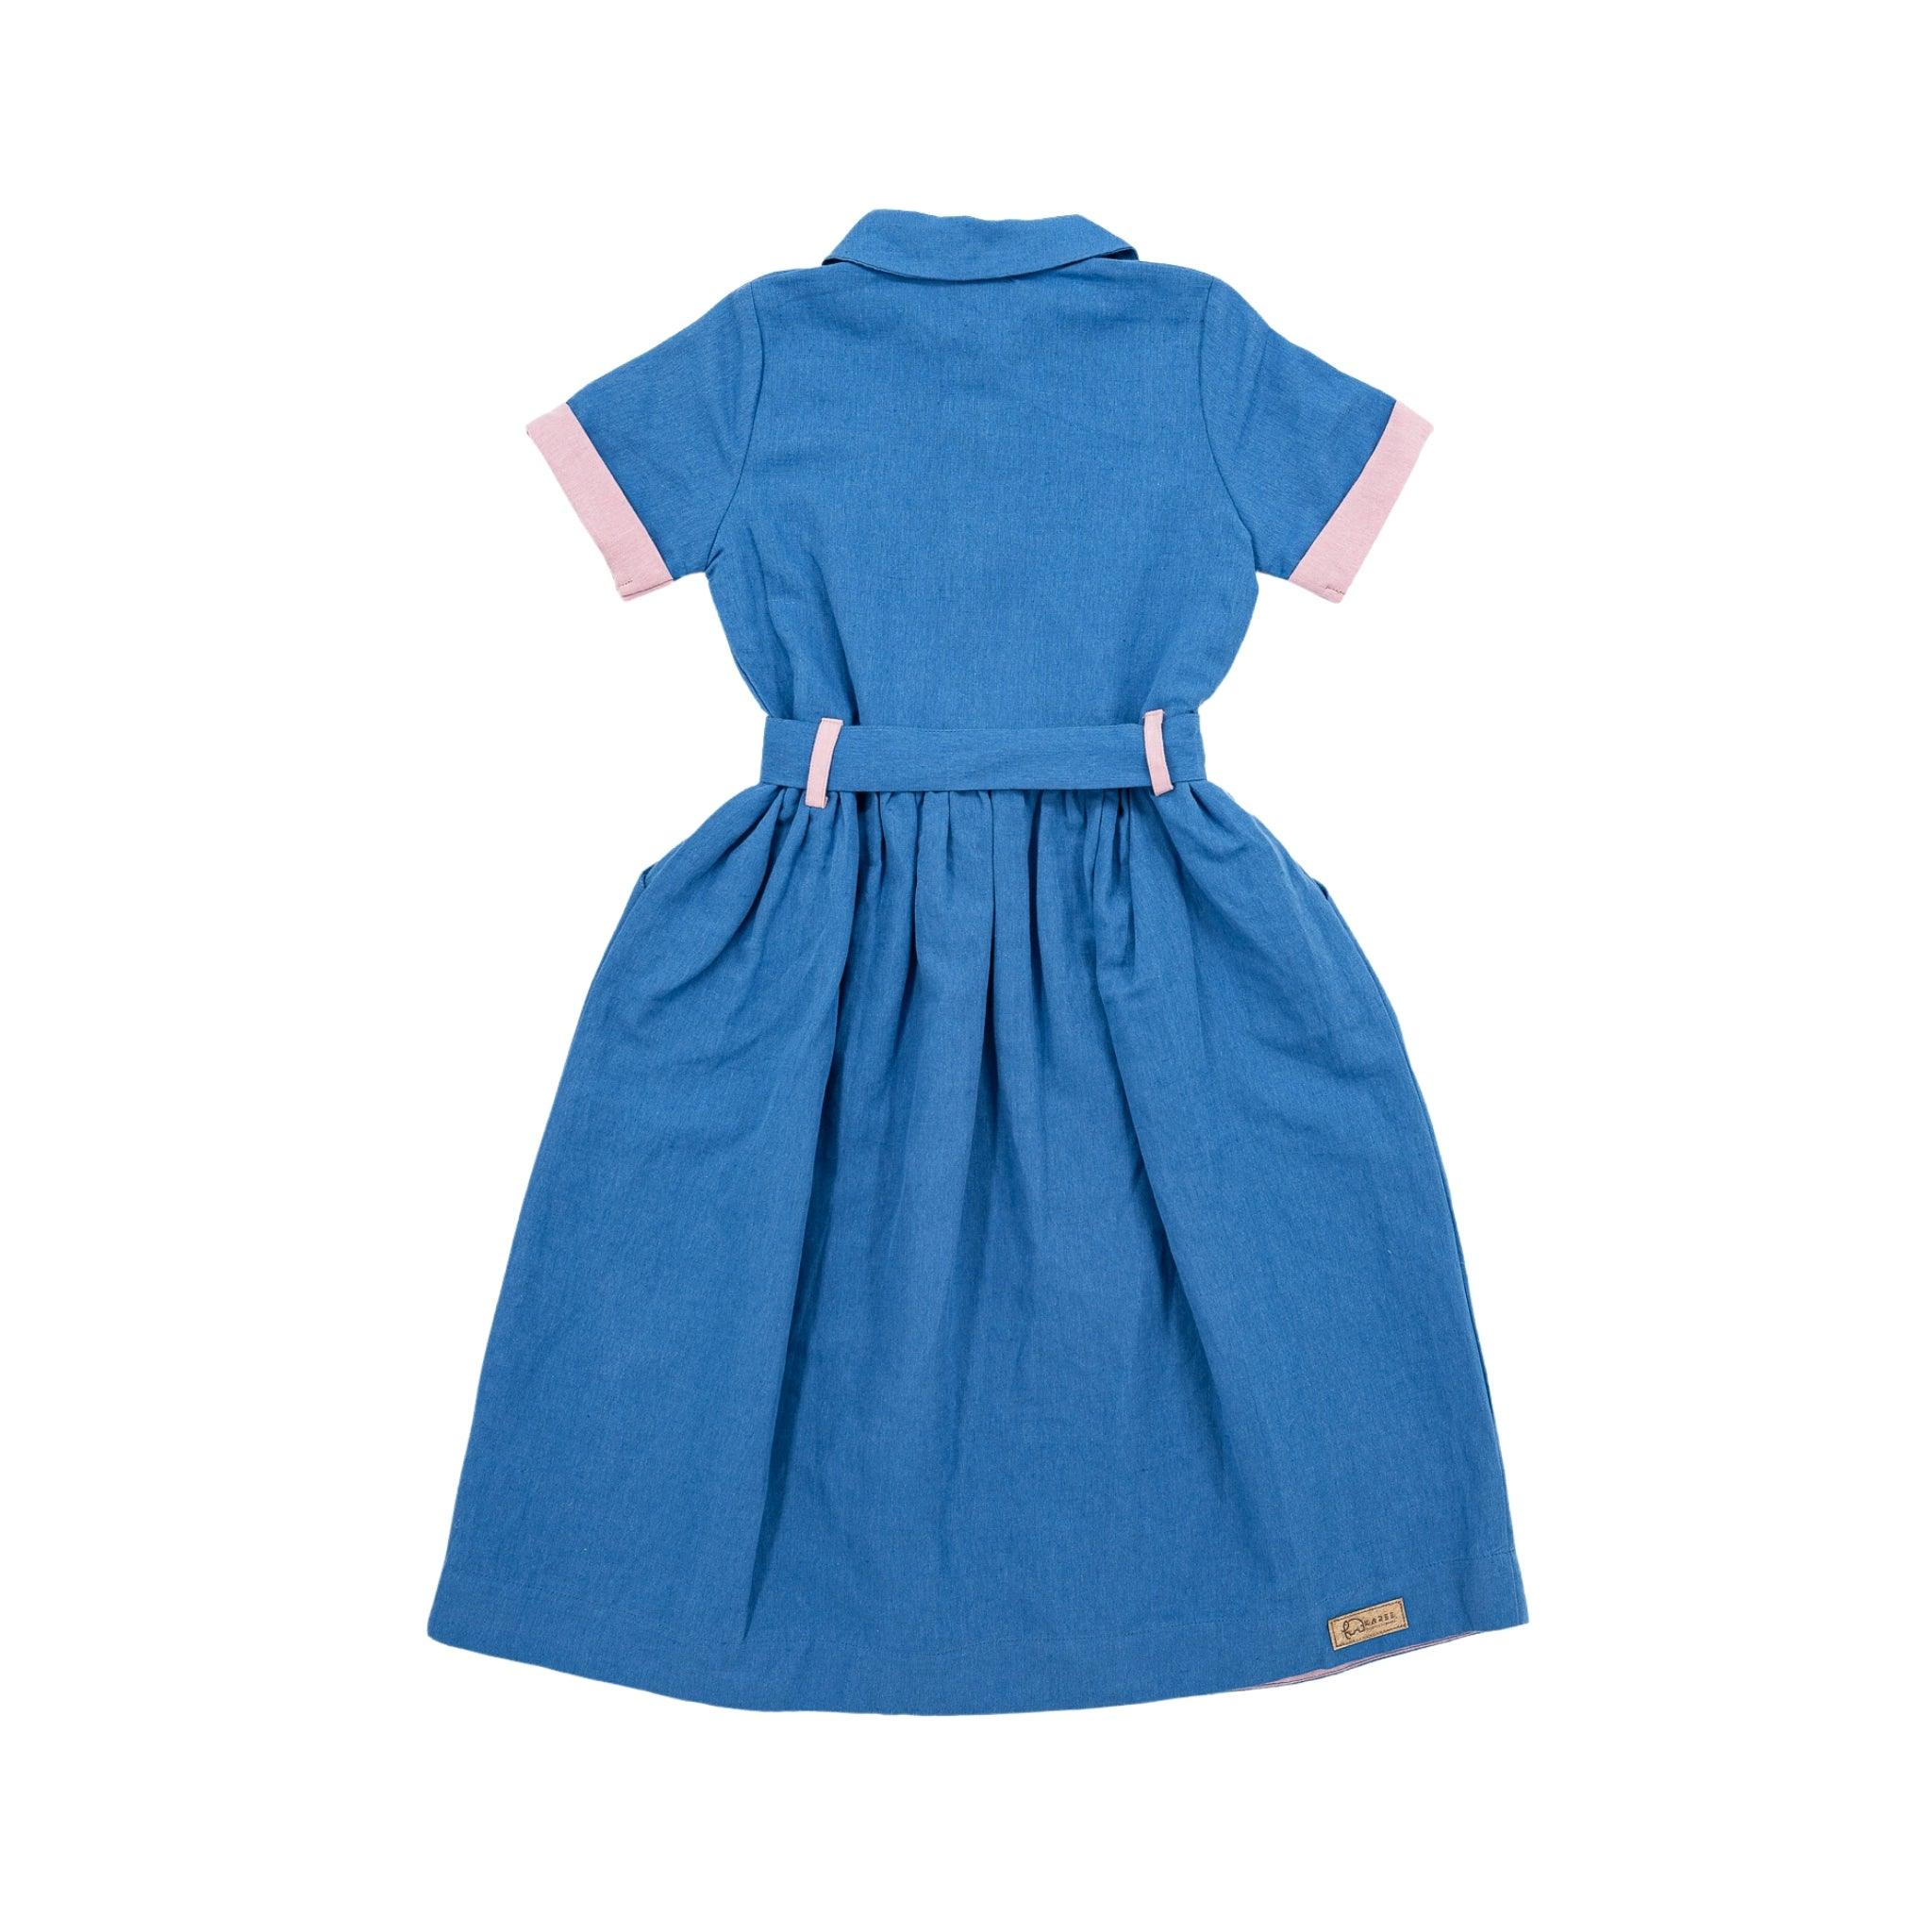 Karee's Parisian Blue Linen Dress for Girls with short sleeves, pink cuffs, a cinched waist, and a collar, displayed against a white background.